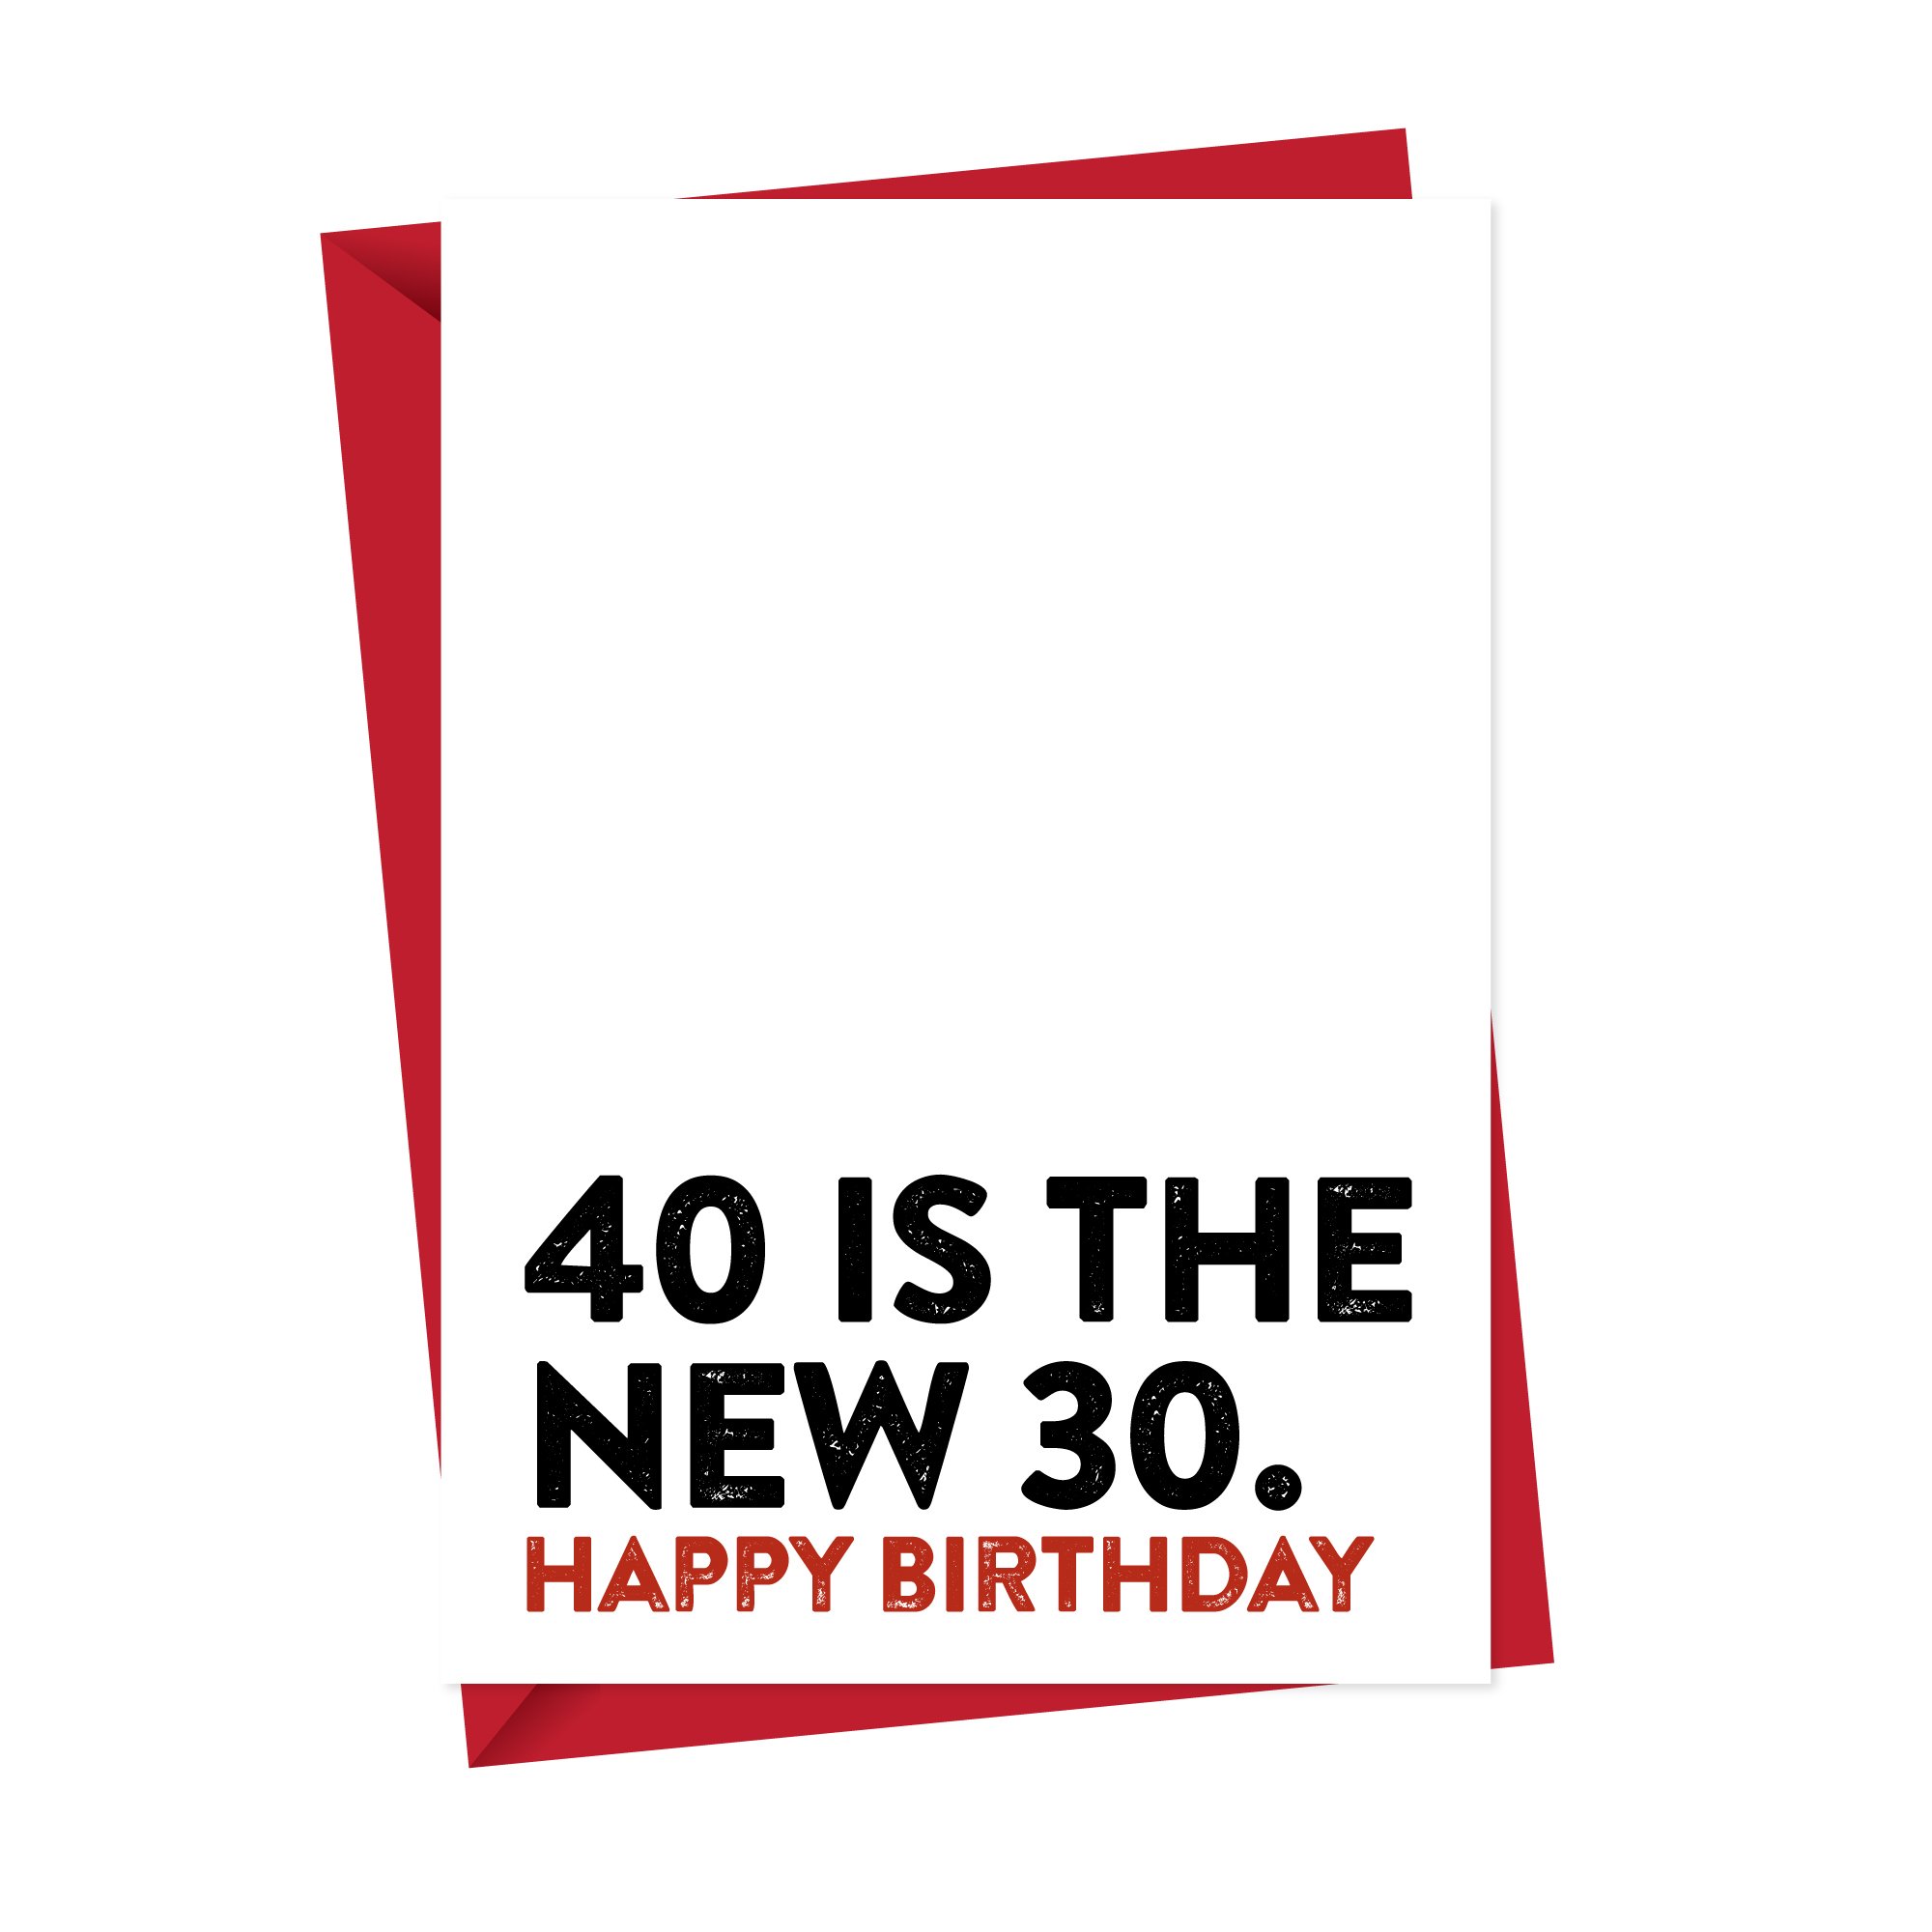 40 is the new 30